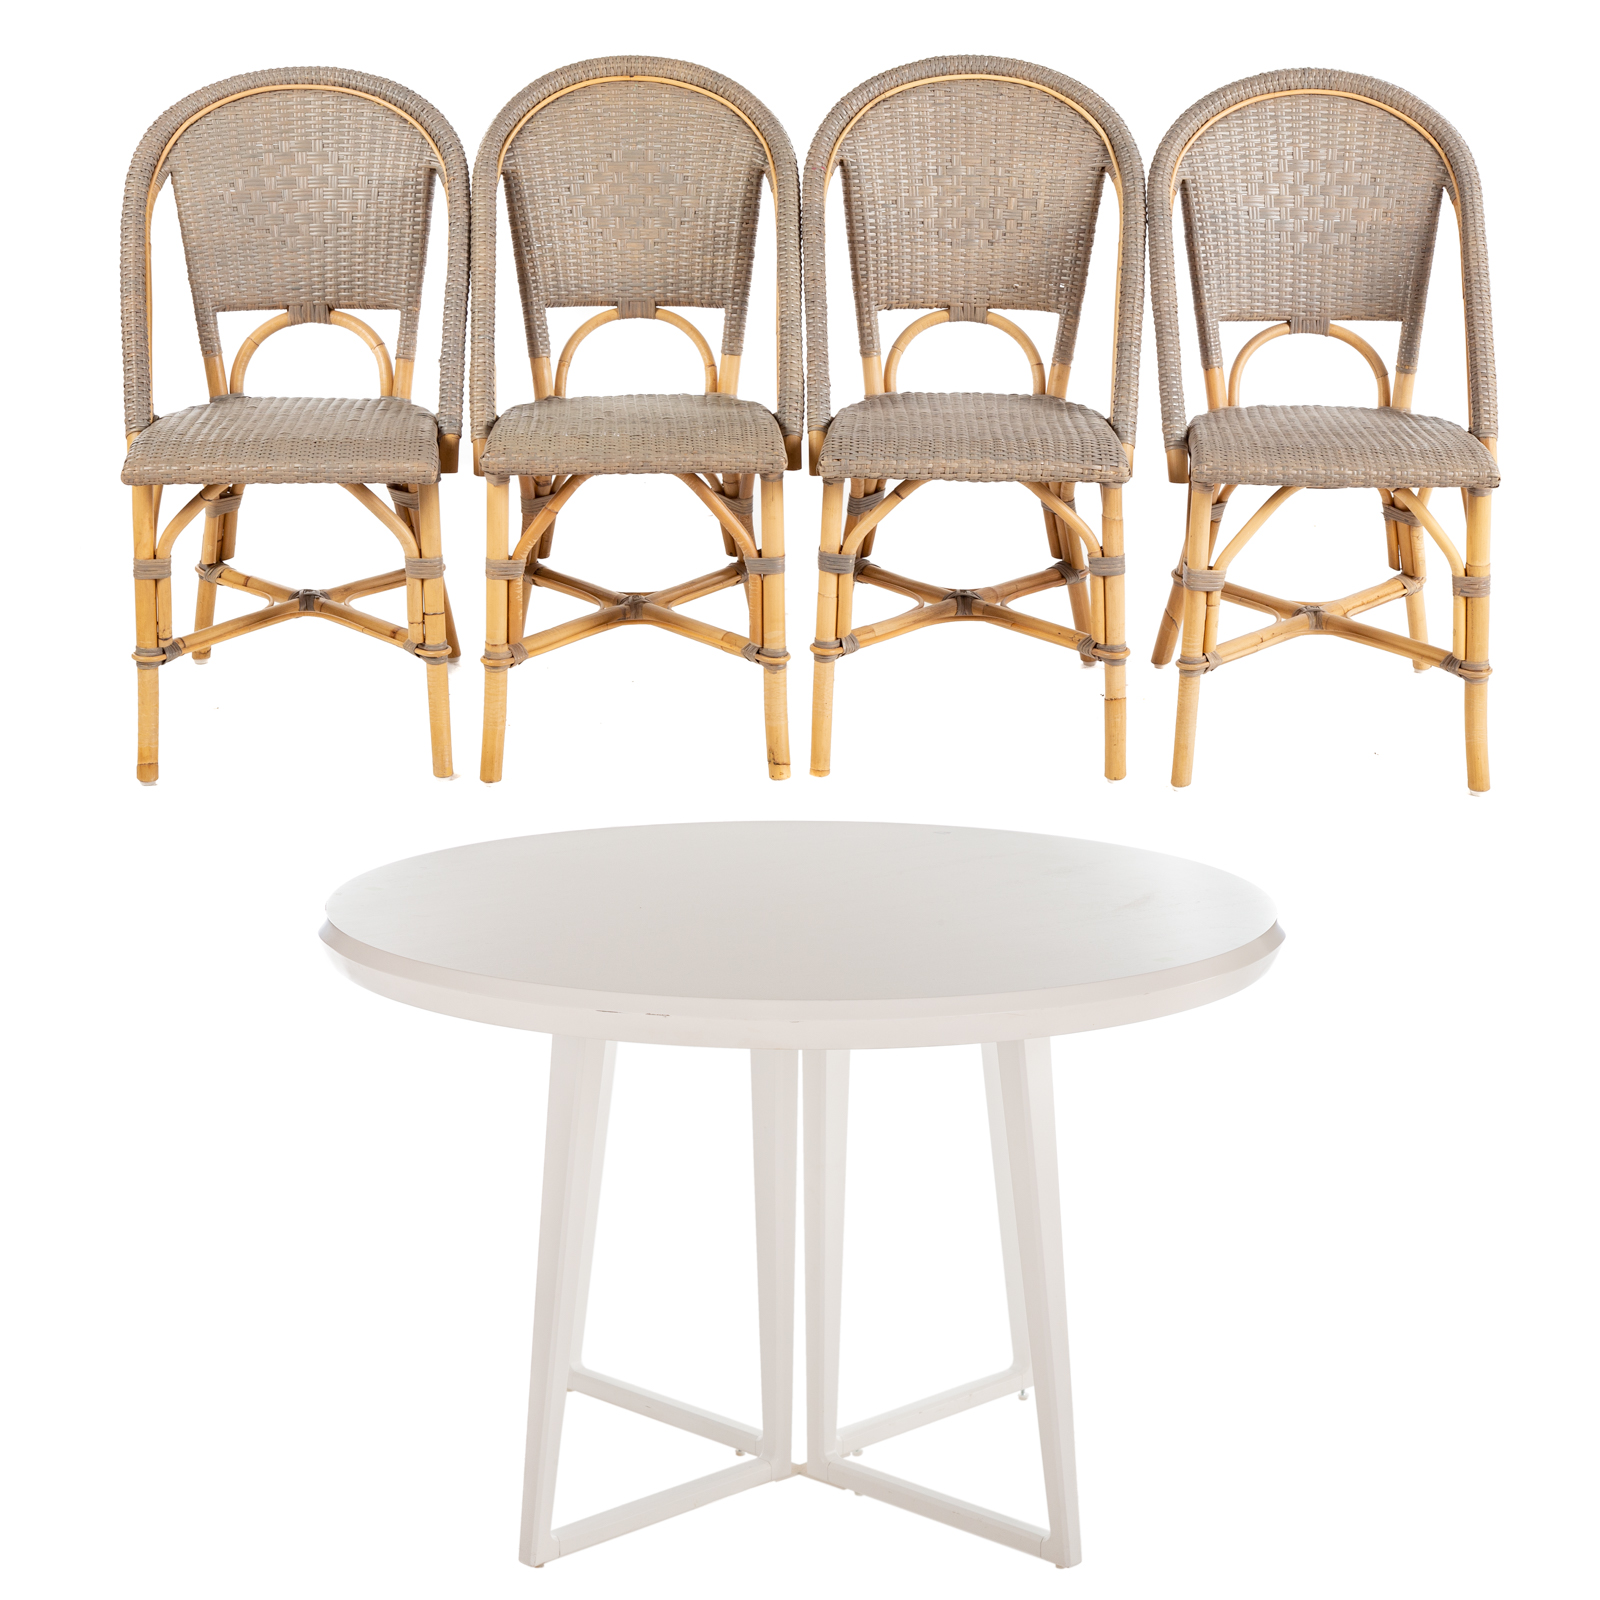 SERENA & LILLY TABLE & FOUR RATTAN